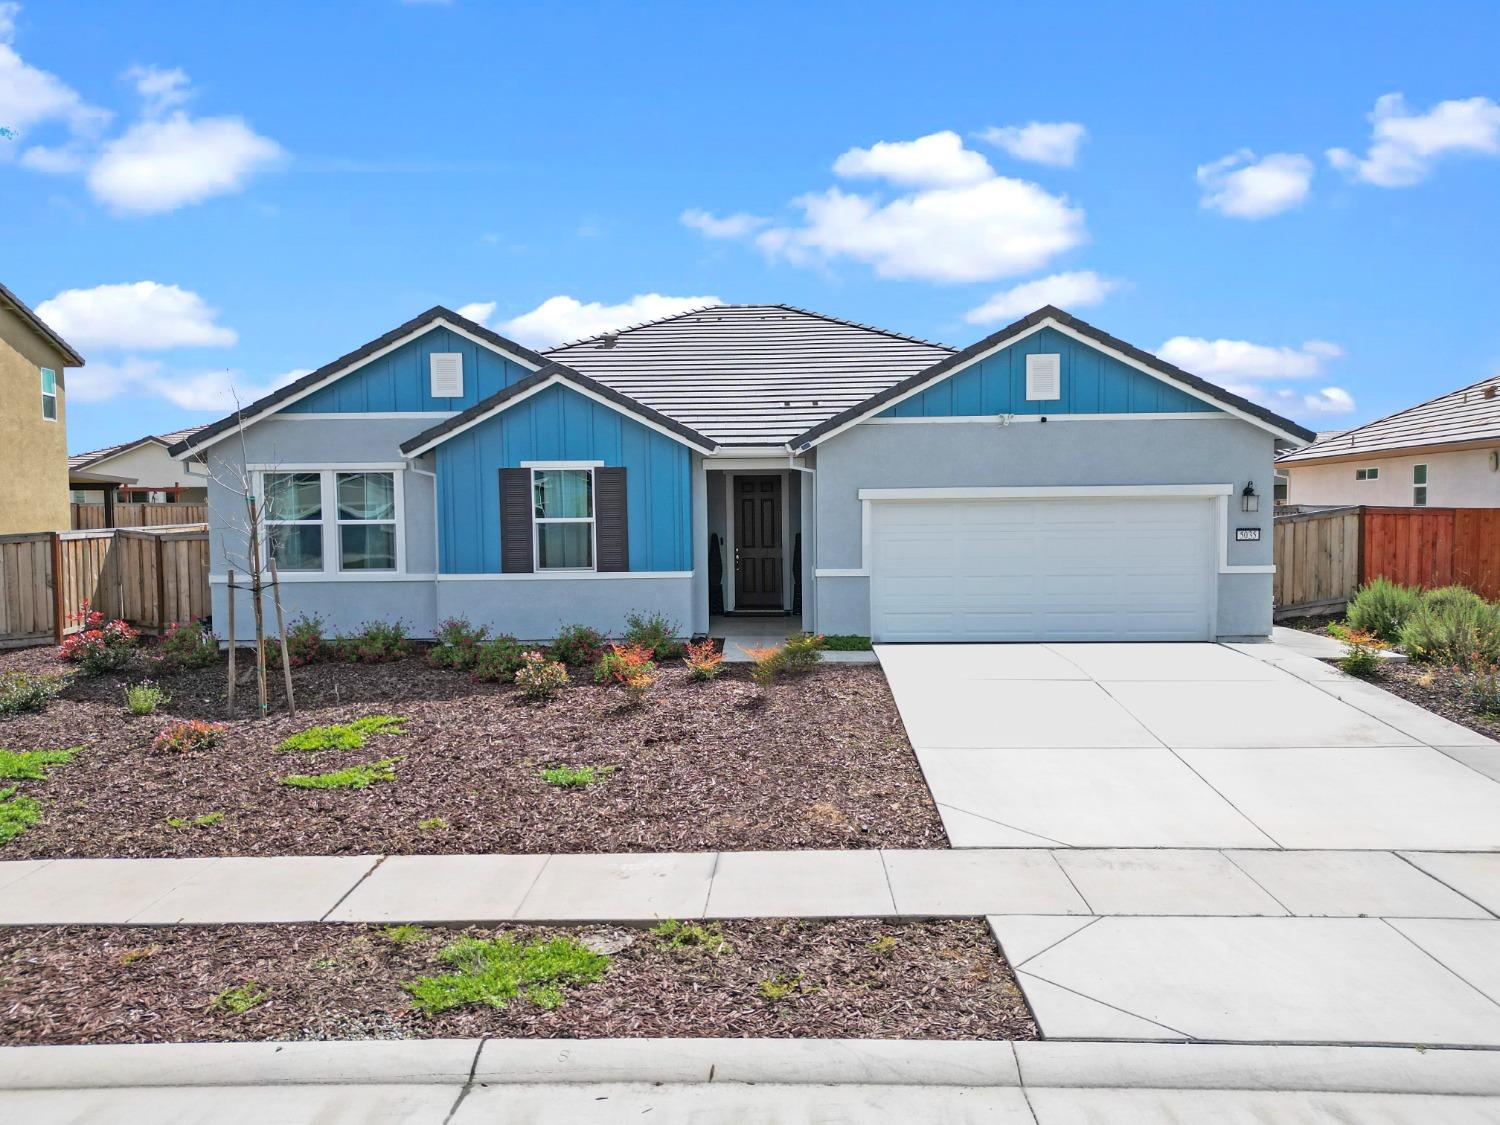 Photo of 5035 Wolfberry Wy in Roseville, CA